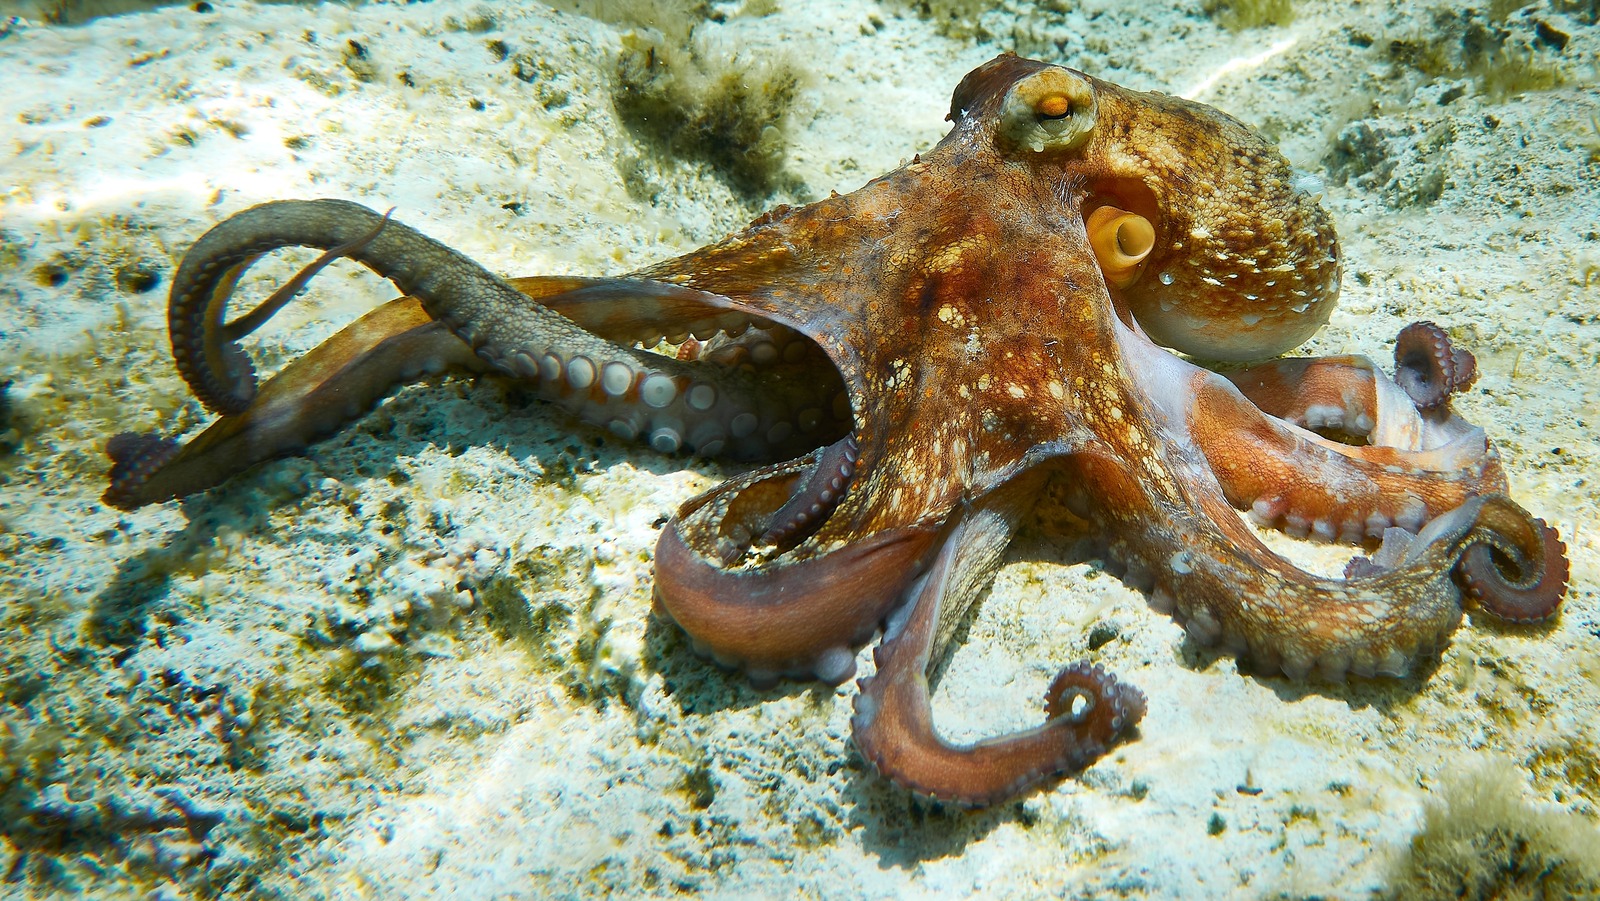 Octopuses Might Change Colors For More Reasons Than Just Camouflage